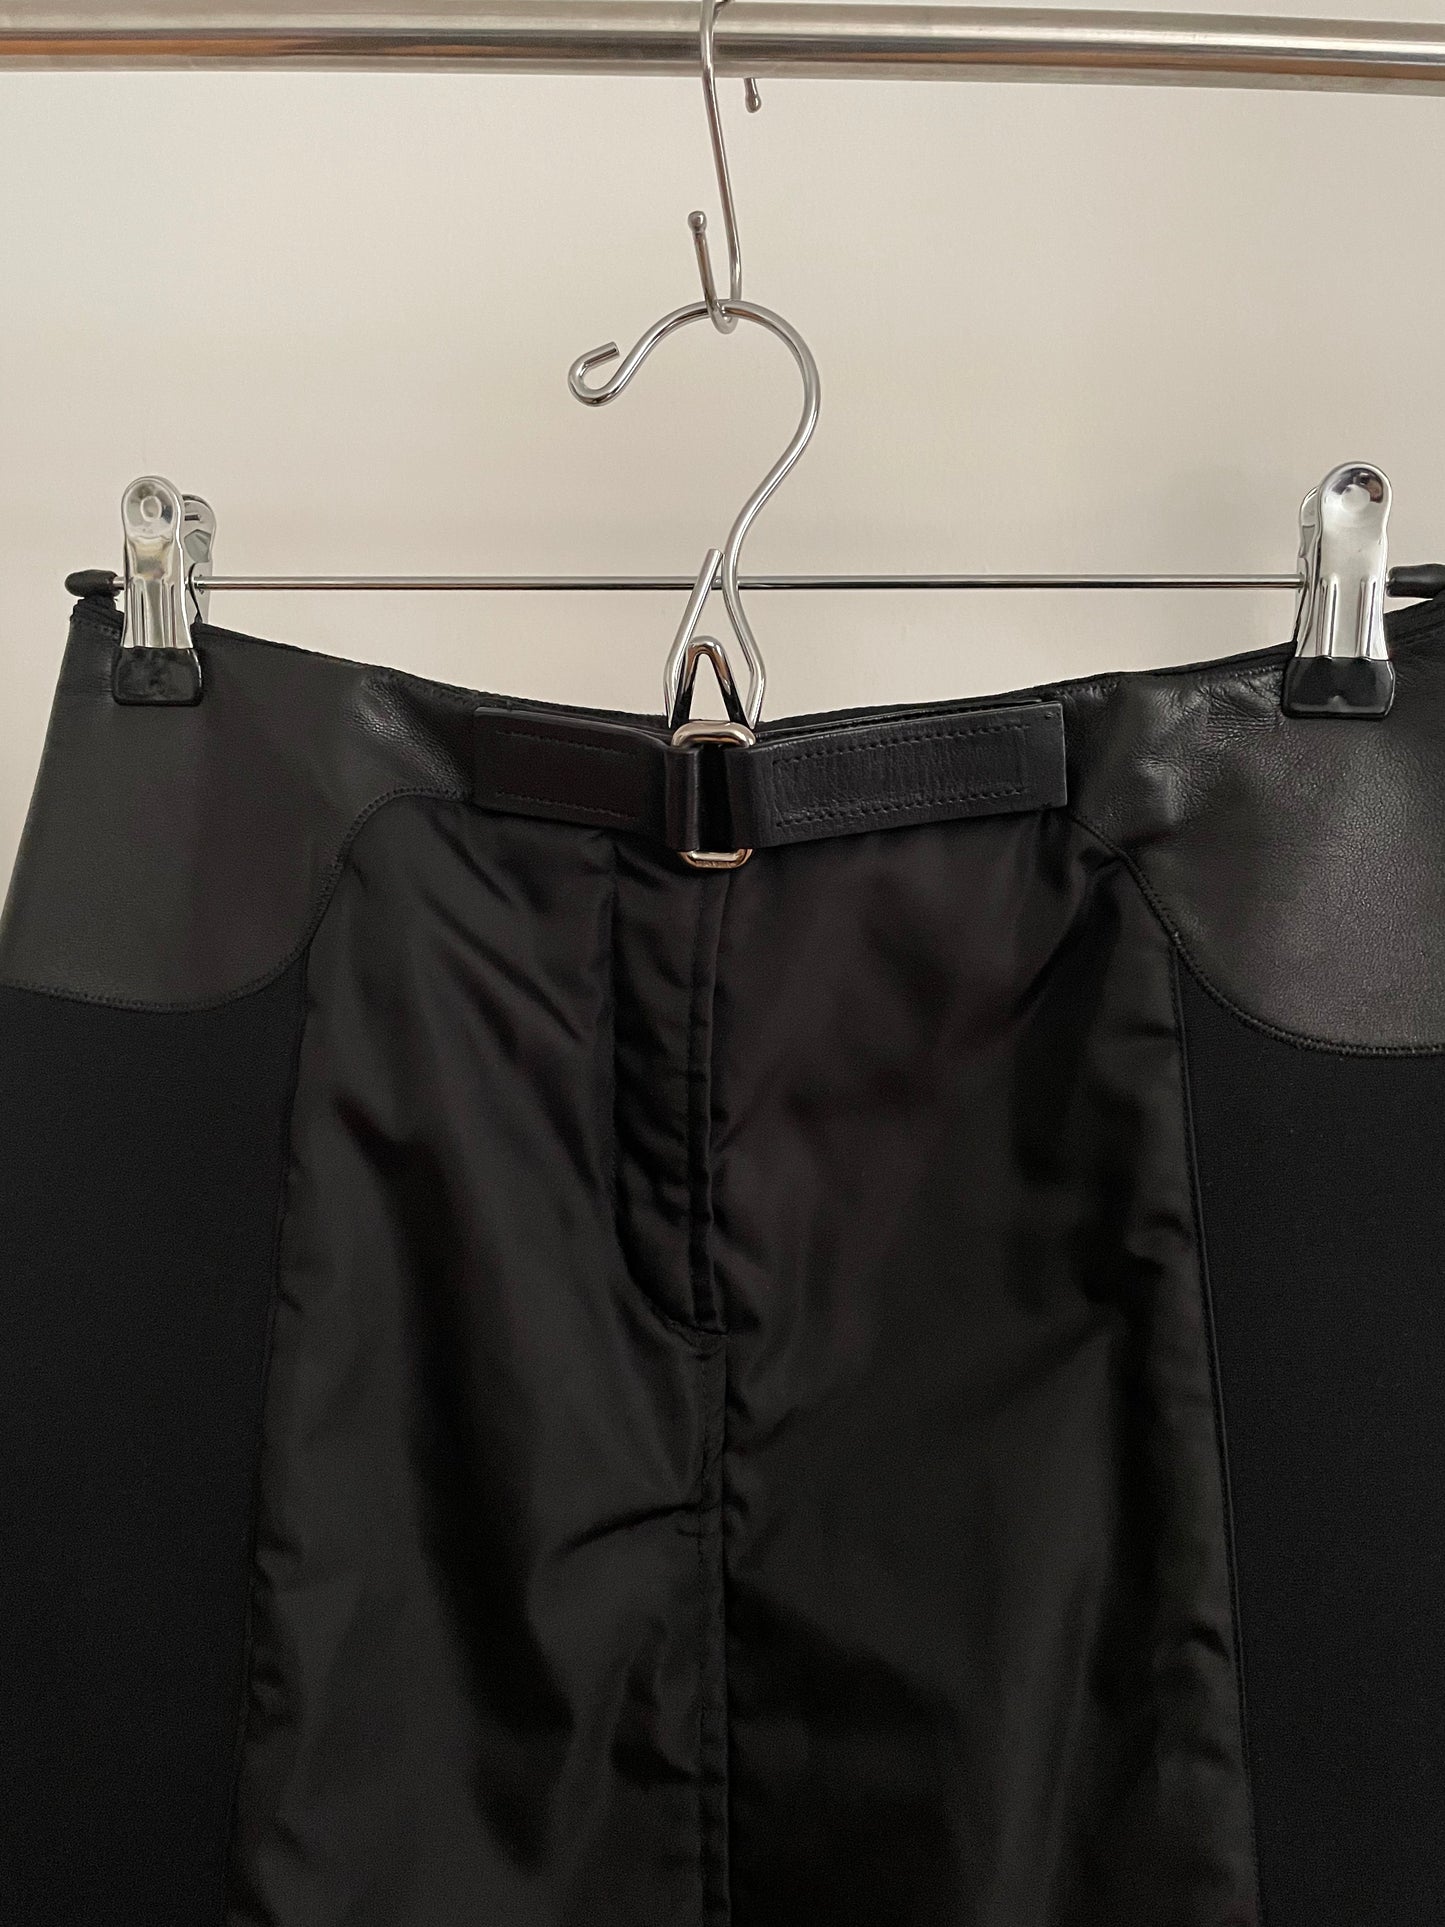 Detail view of vintage womens black Prada skirt in nylon and neoprene with leather details